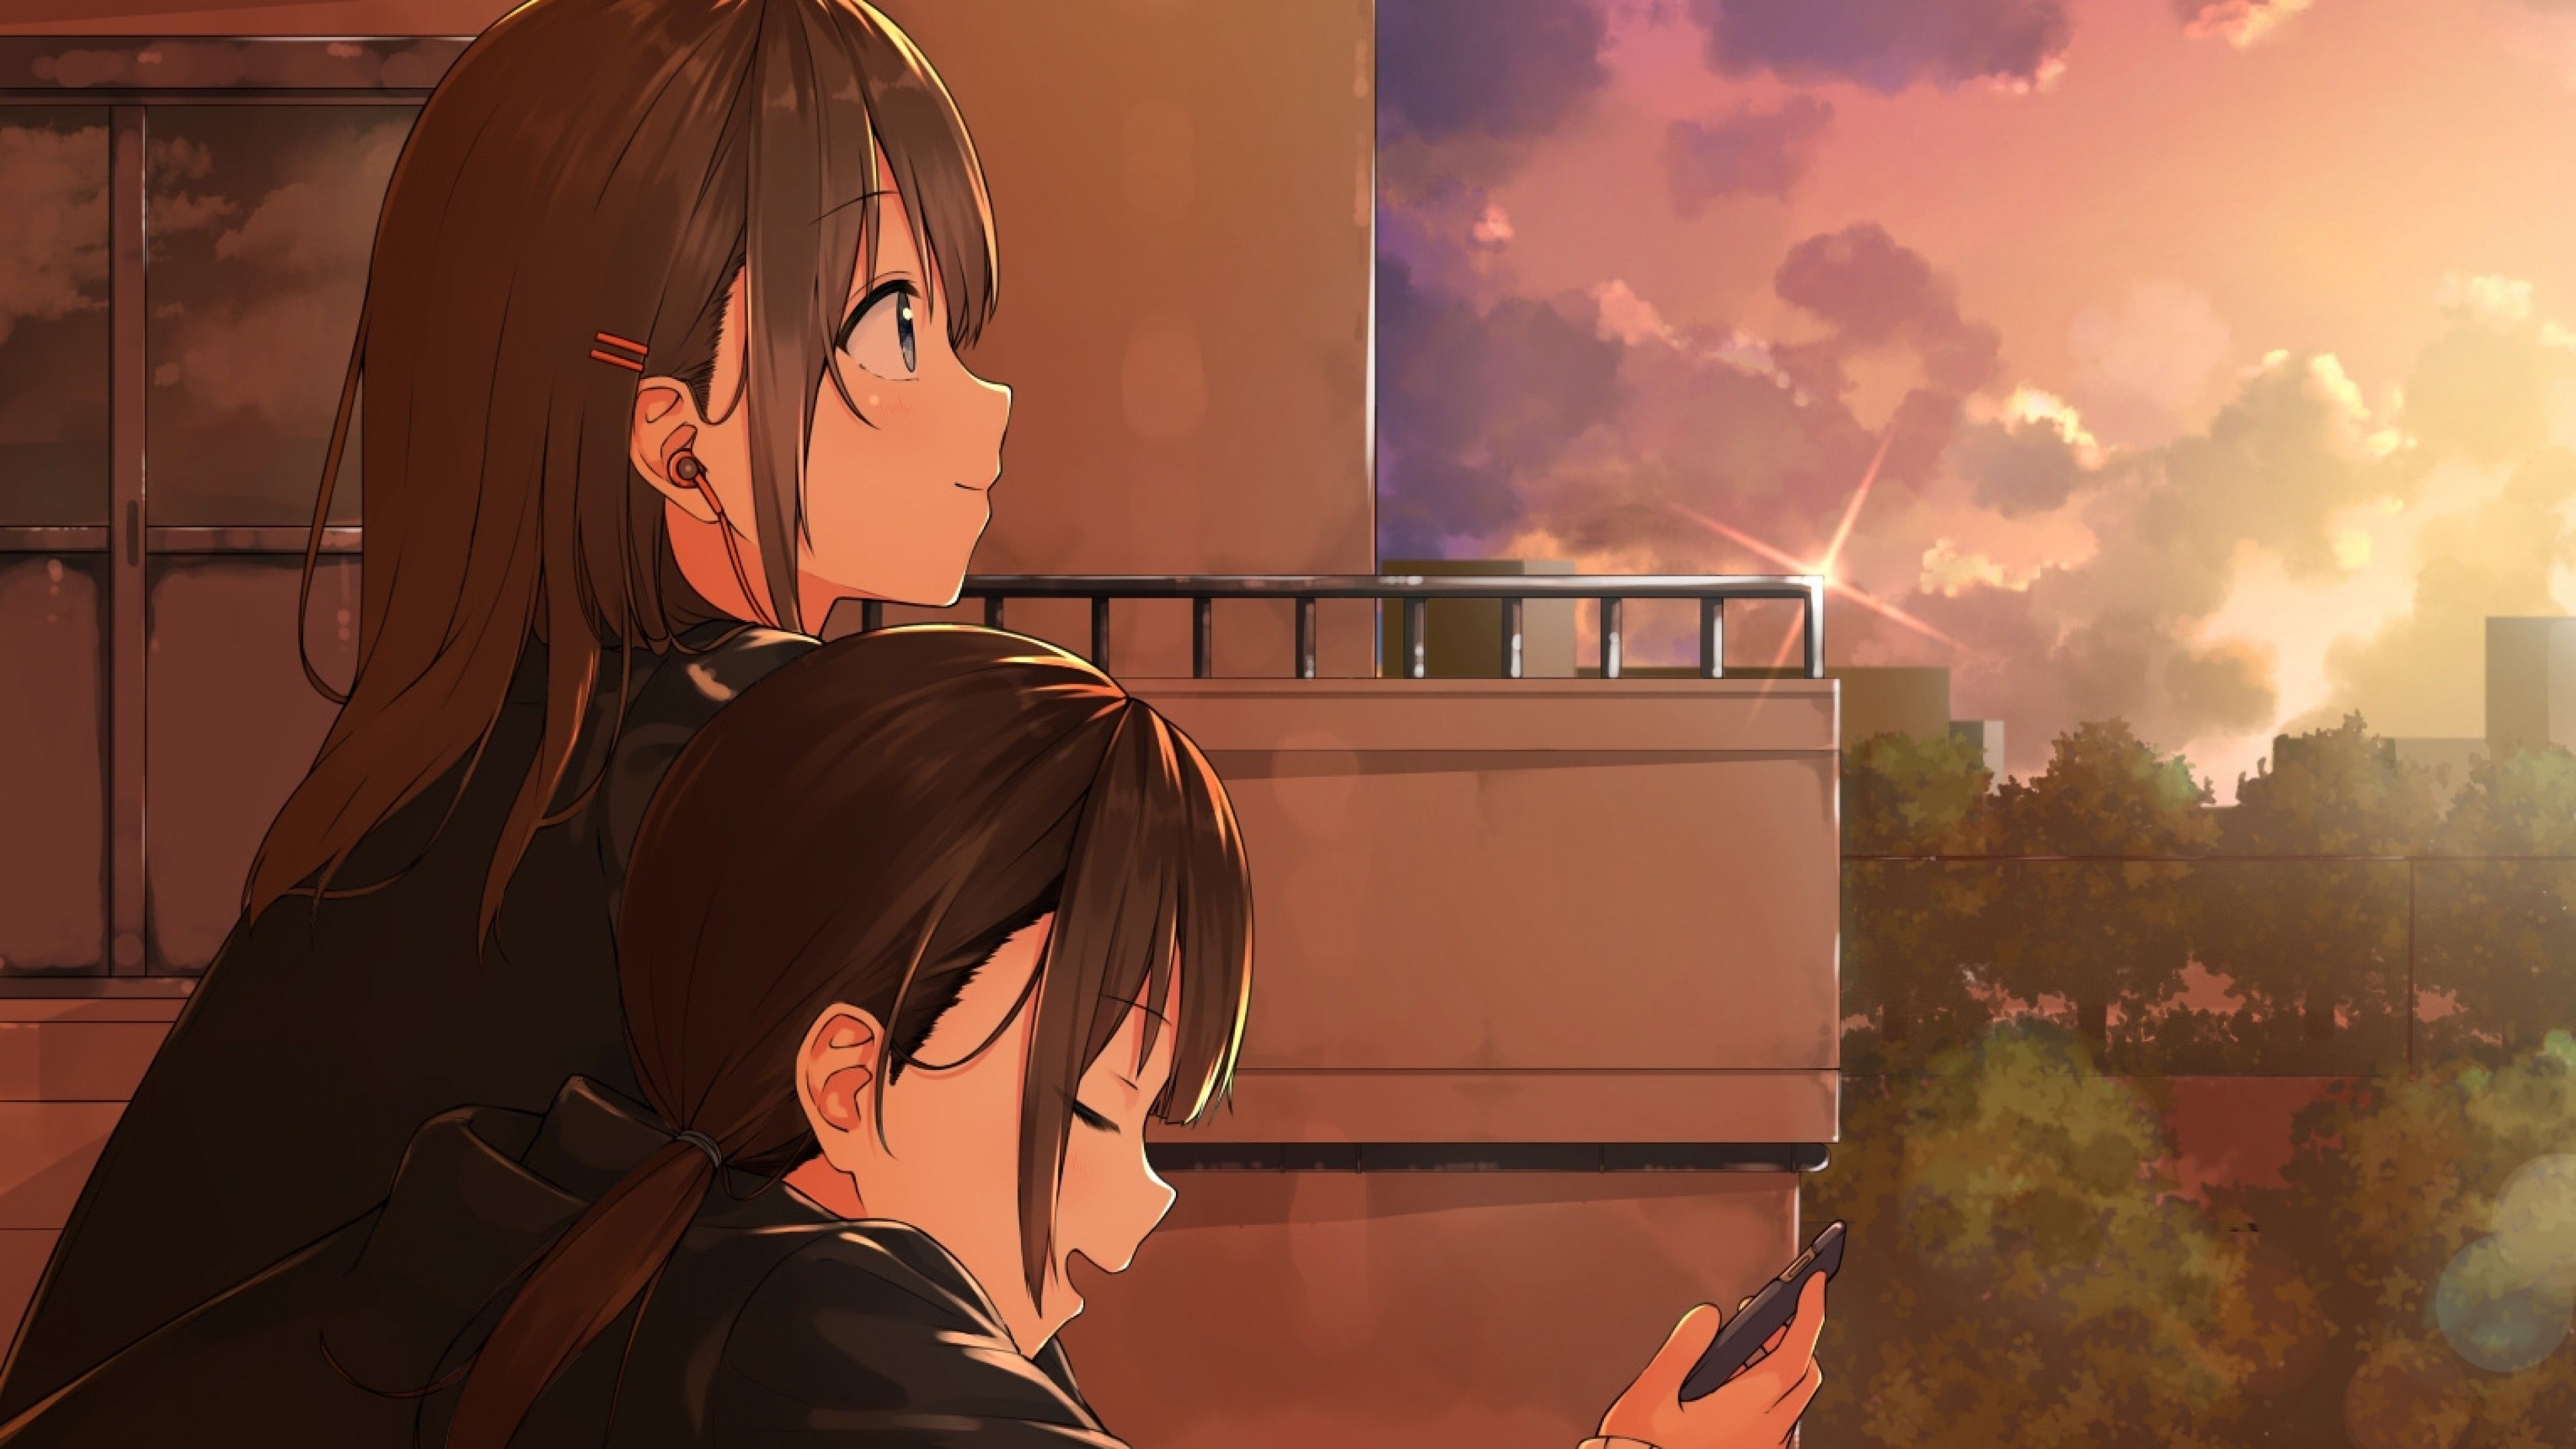 Download 3840x2160 Anime School Girls, Sunset, Building, Relaxing, Ponytail Wallpaper for UHD TV